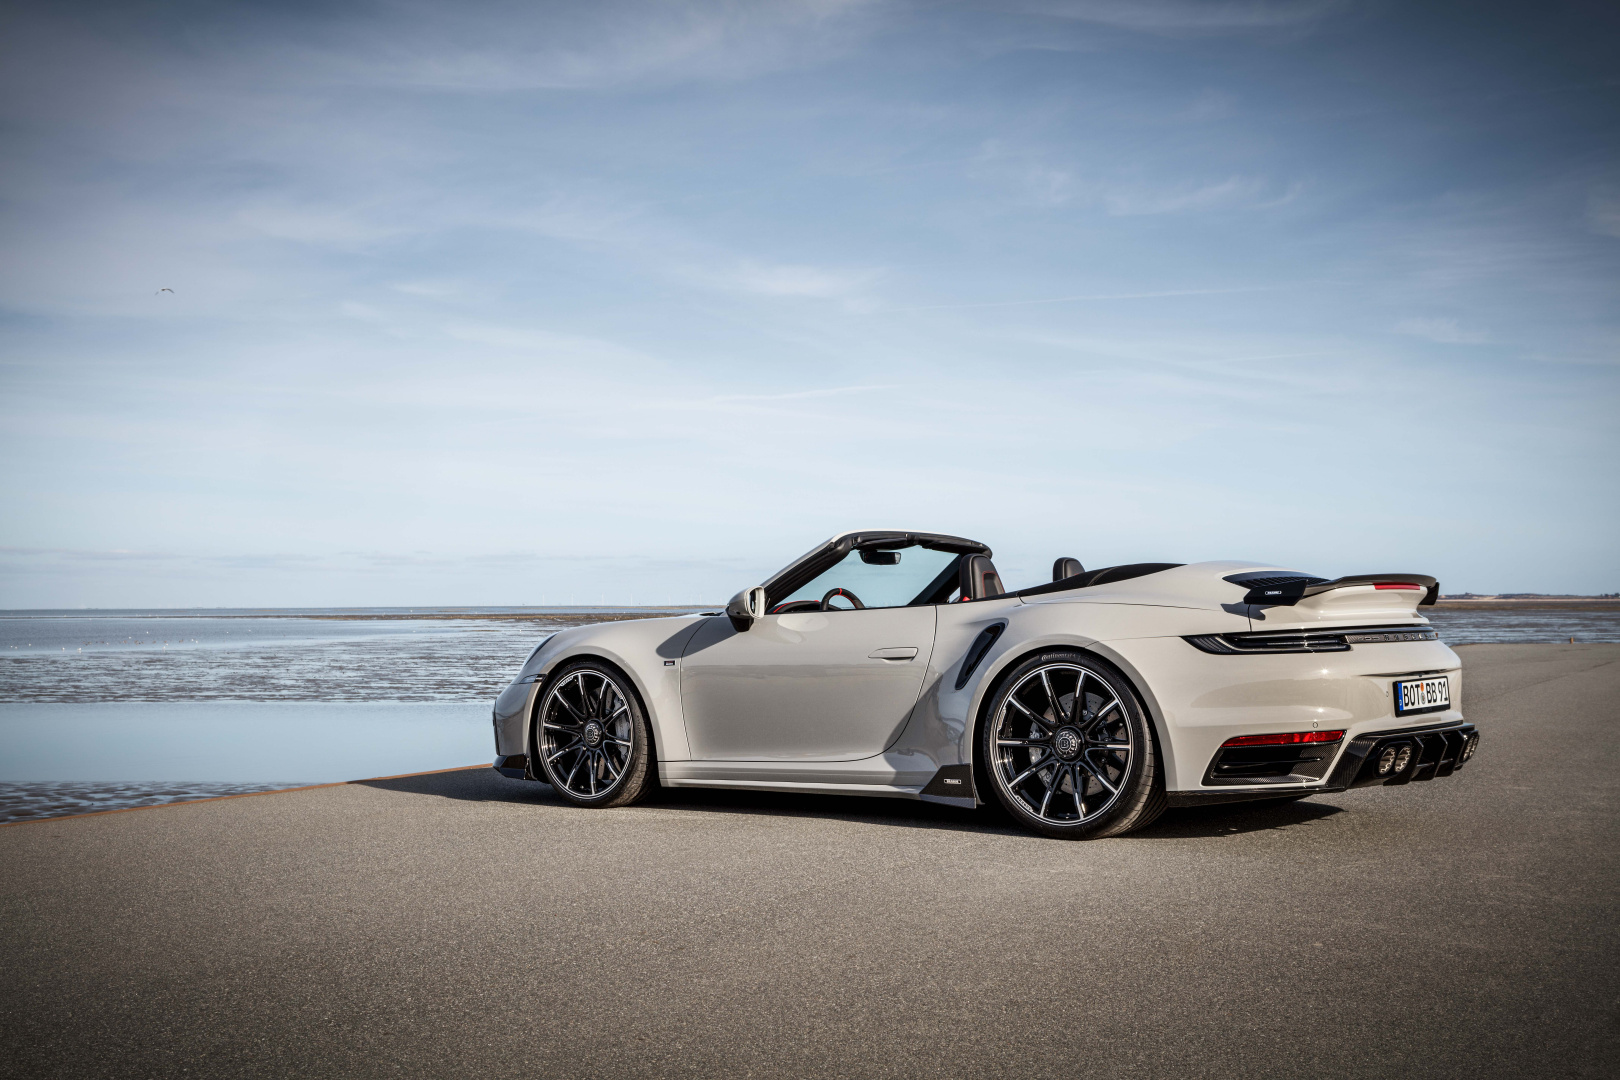 SMALL_BRABUS 820 based on 911 Turbo S Cabriolet Outdoor (20)